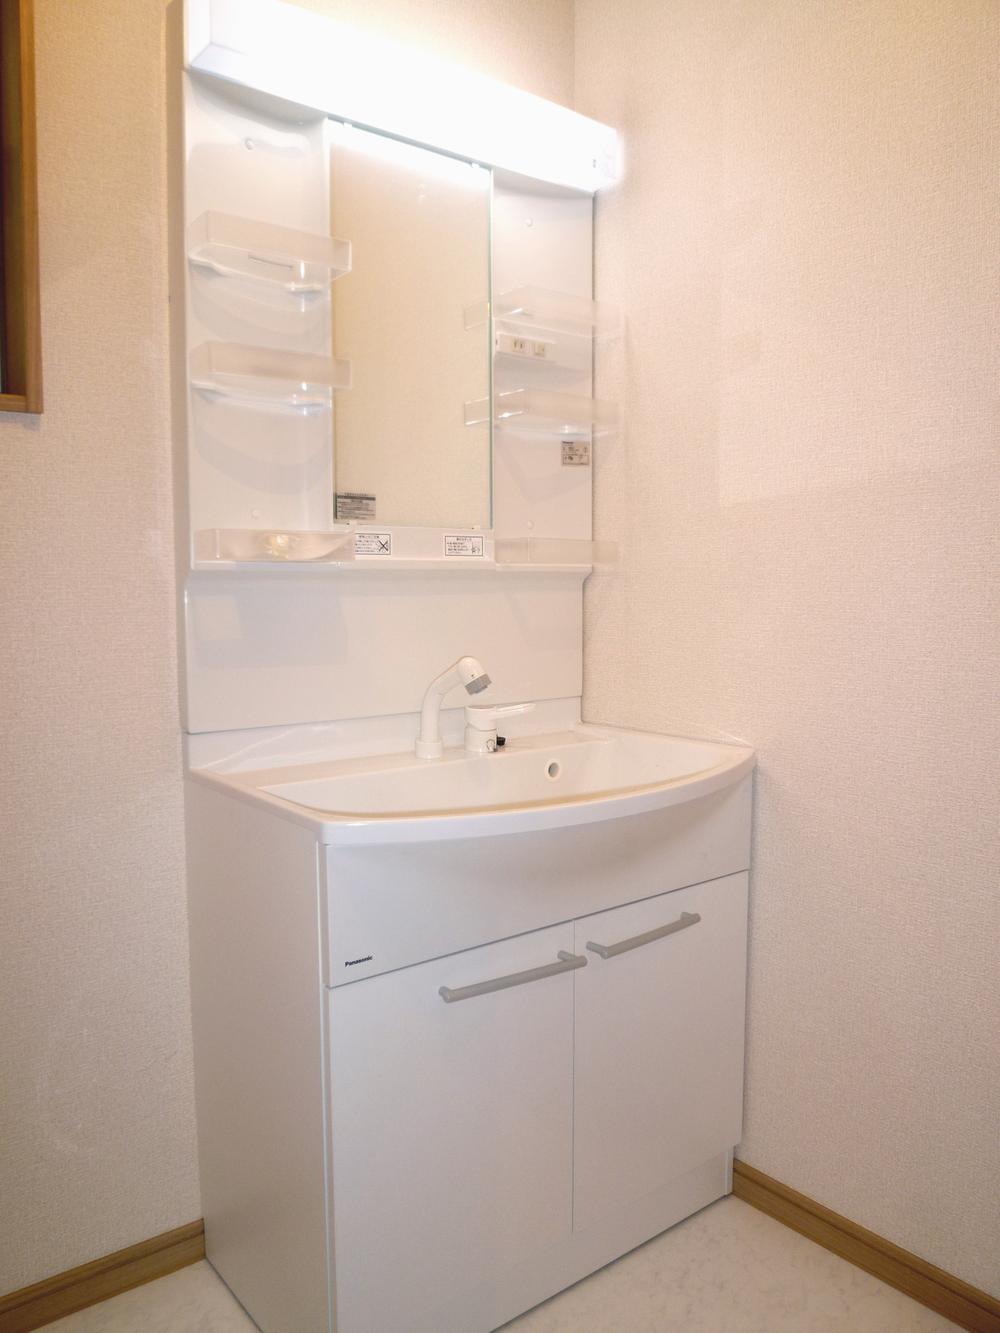 Wash basin, toilet. Vanity (construction cases) cleaning also Easy hand shower + fogging also standard specification